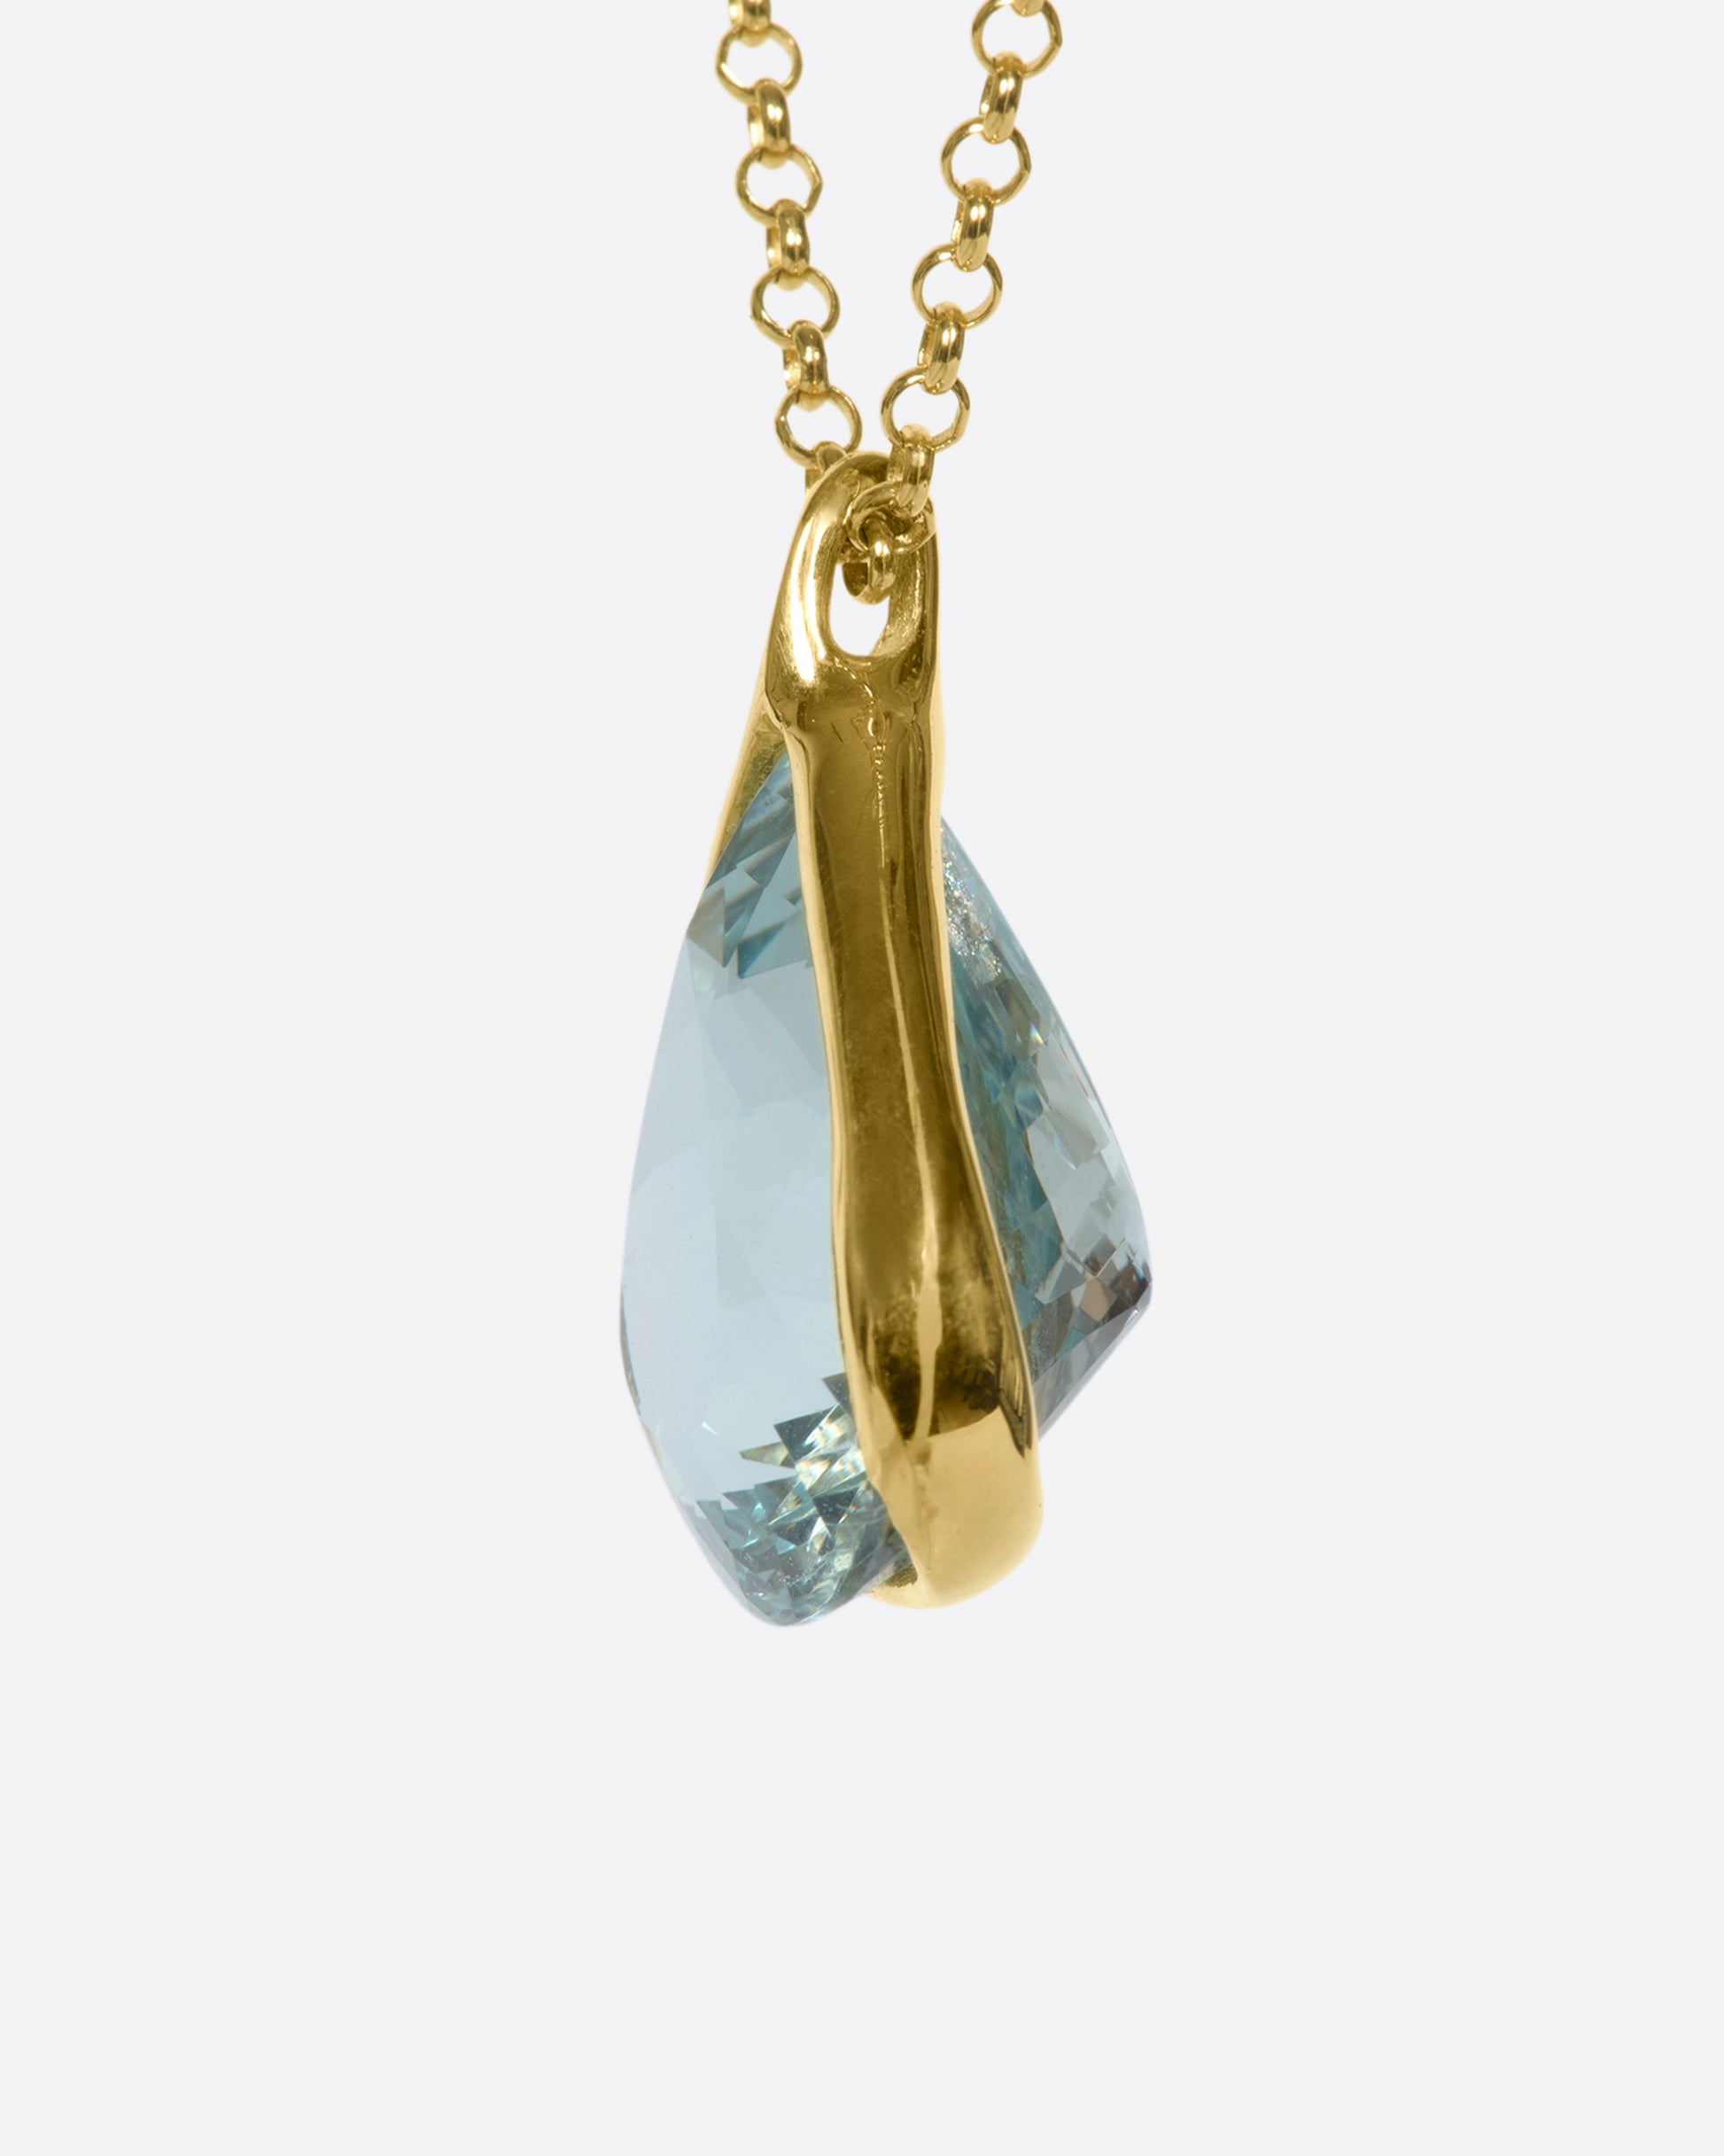 A yellow gold cable chain necklace with a large triangular aquamarine pendant